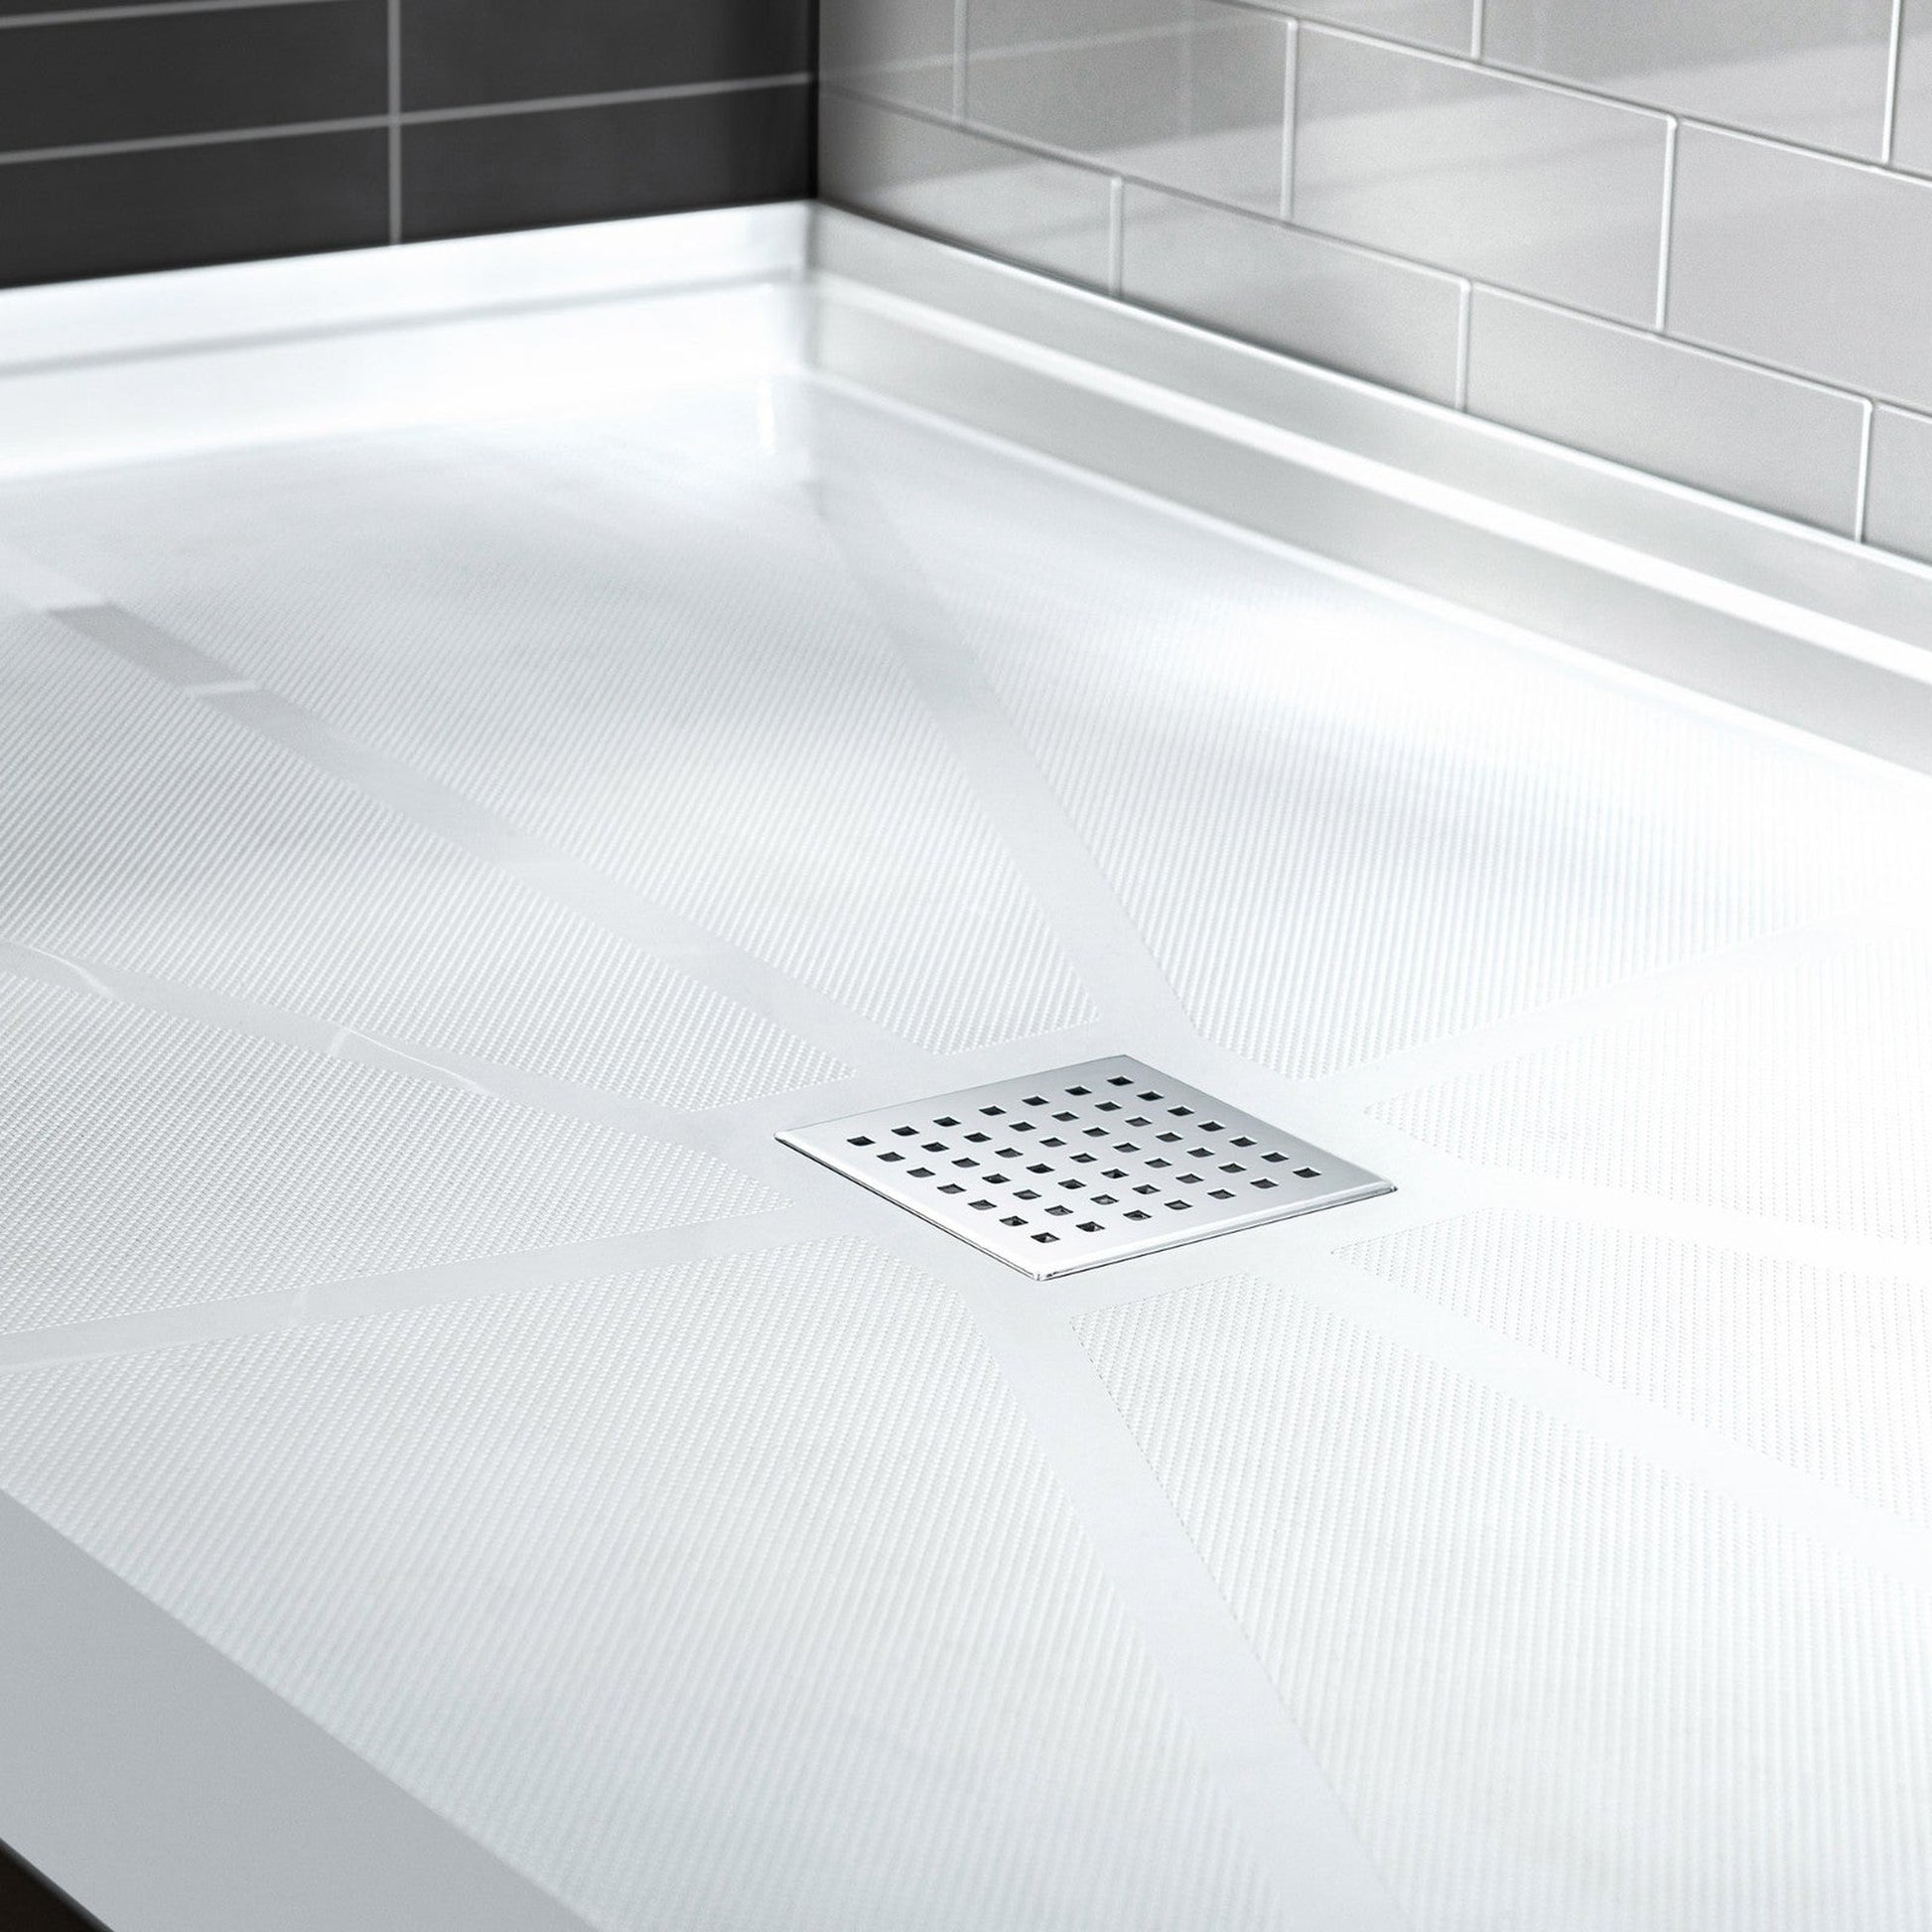 WoodBridge 48" x 36" White Solid Surface Shower Base Center Drain Location With Chrome Trench Drain Cover